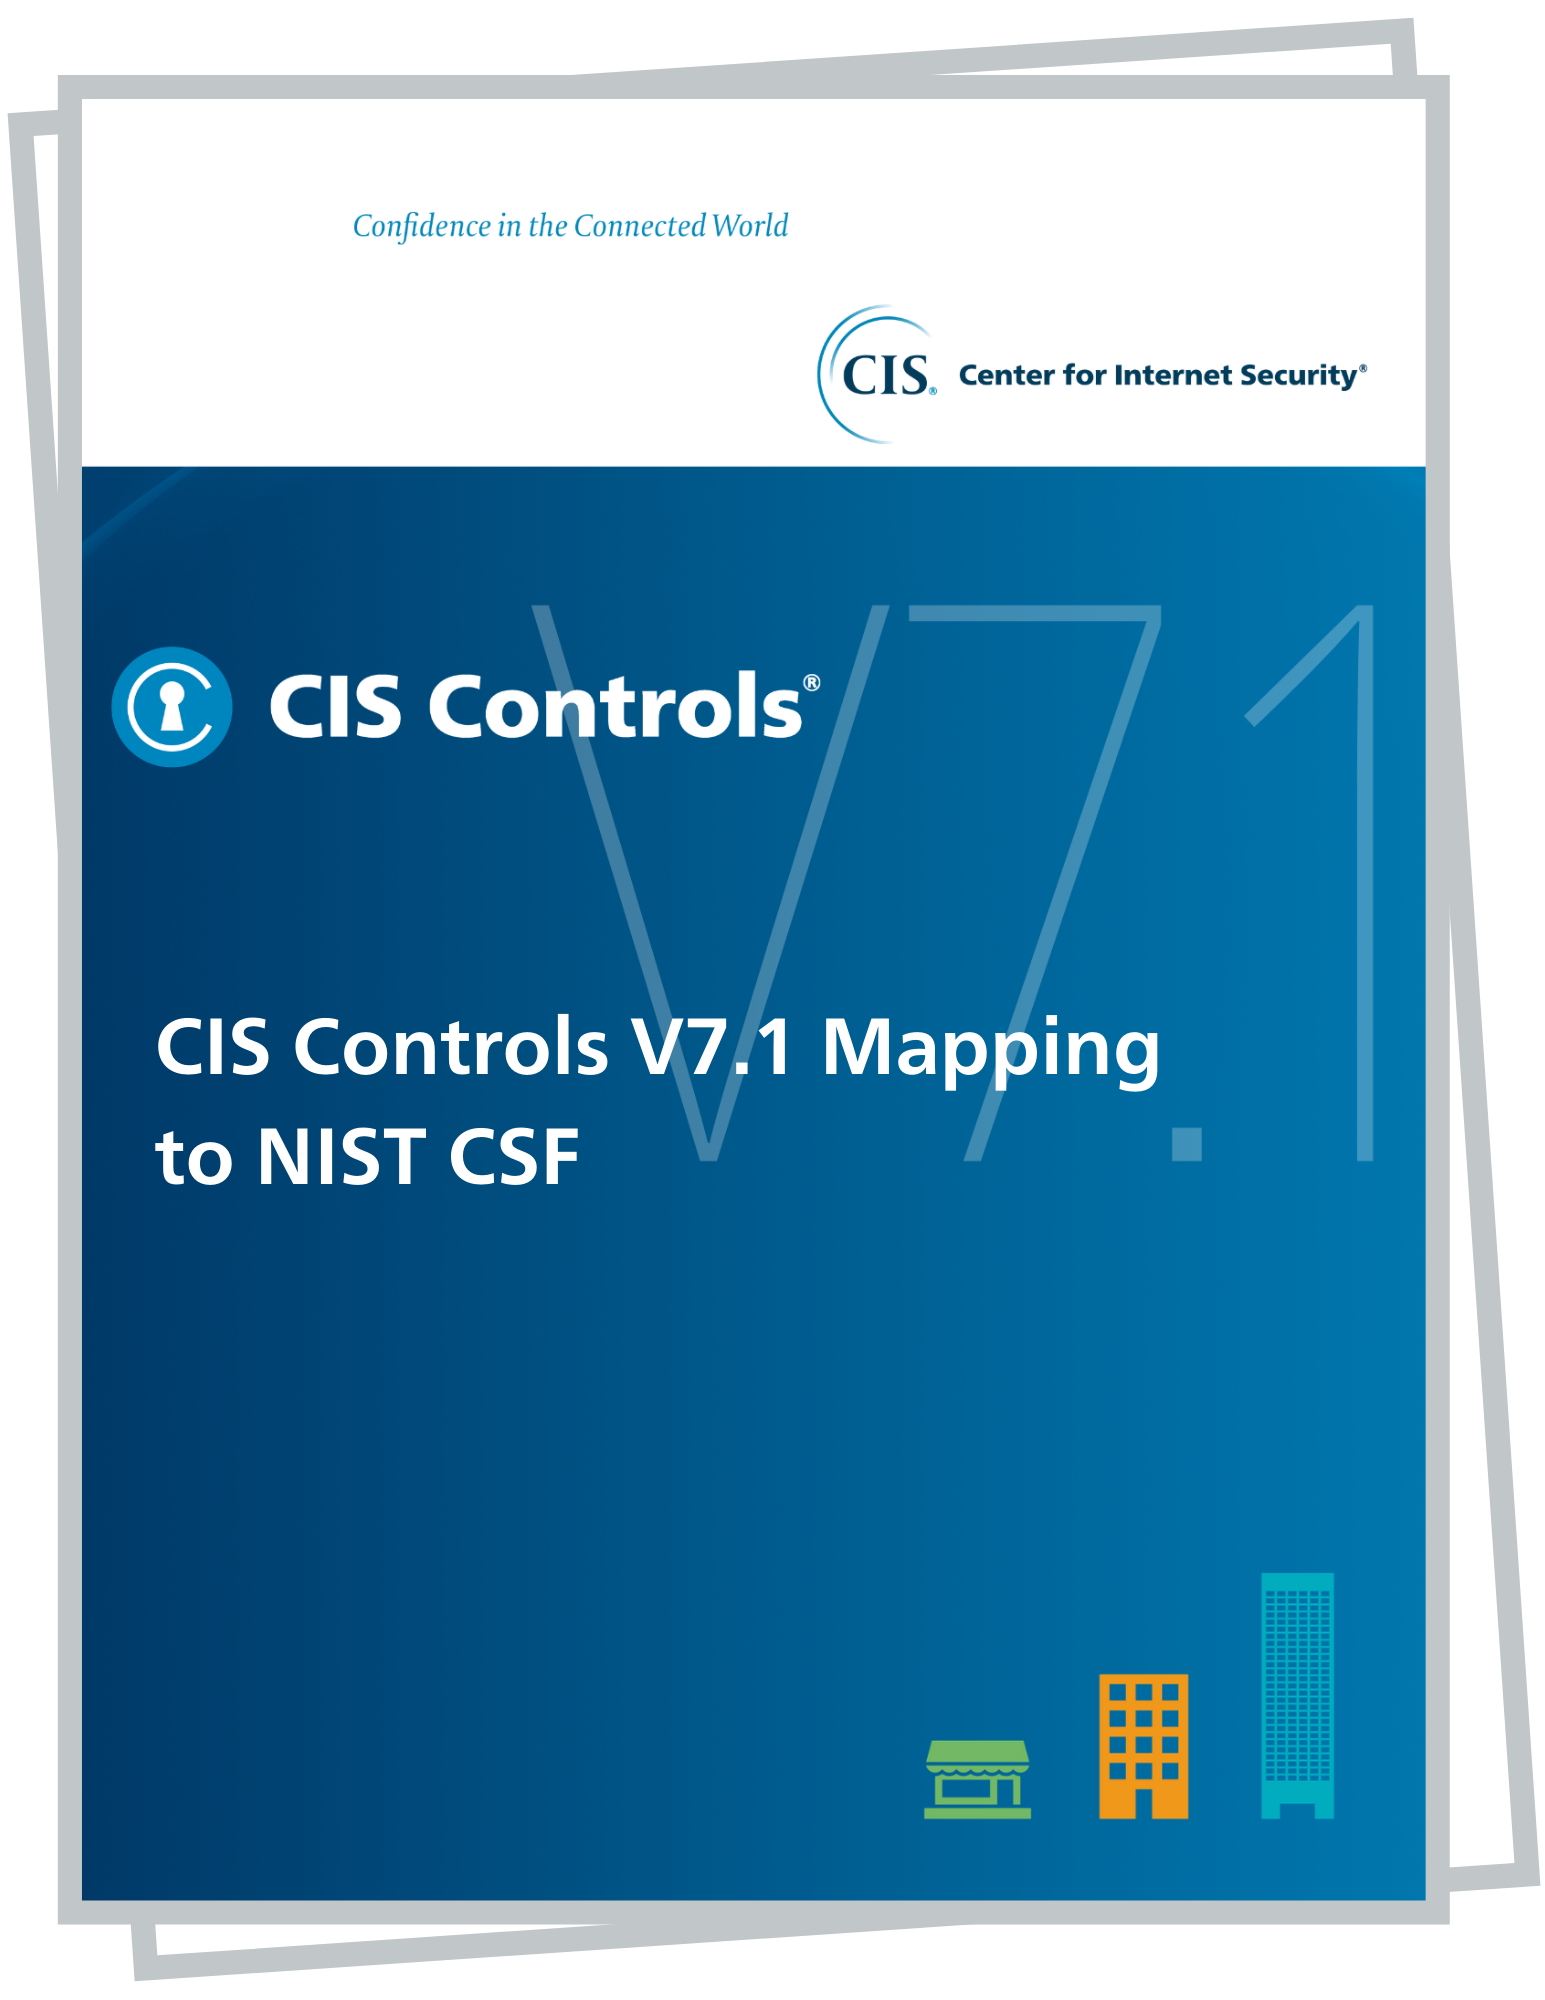 CIS Controls V7.1 Mapping to NIST CSF